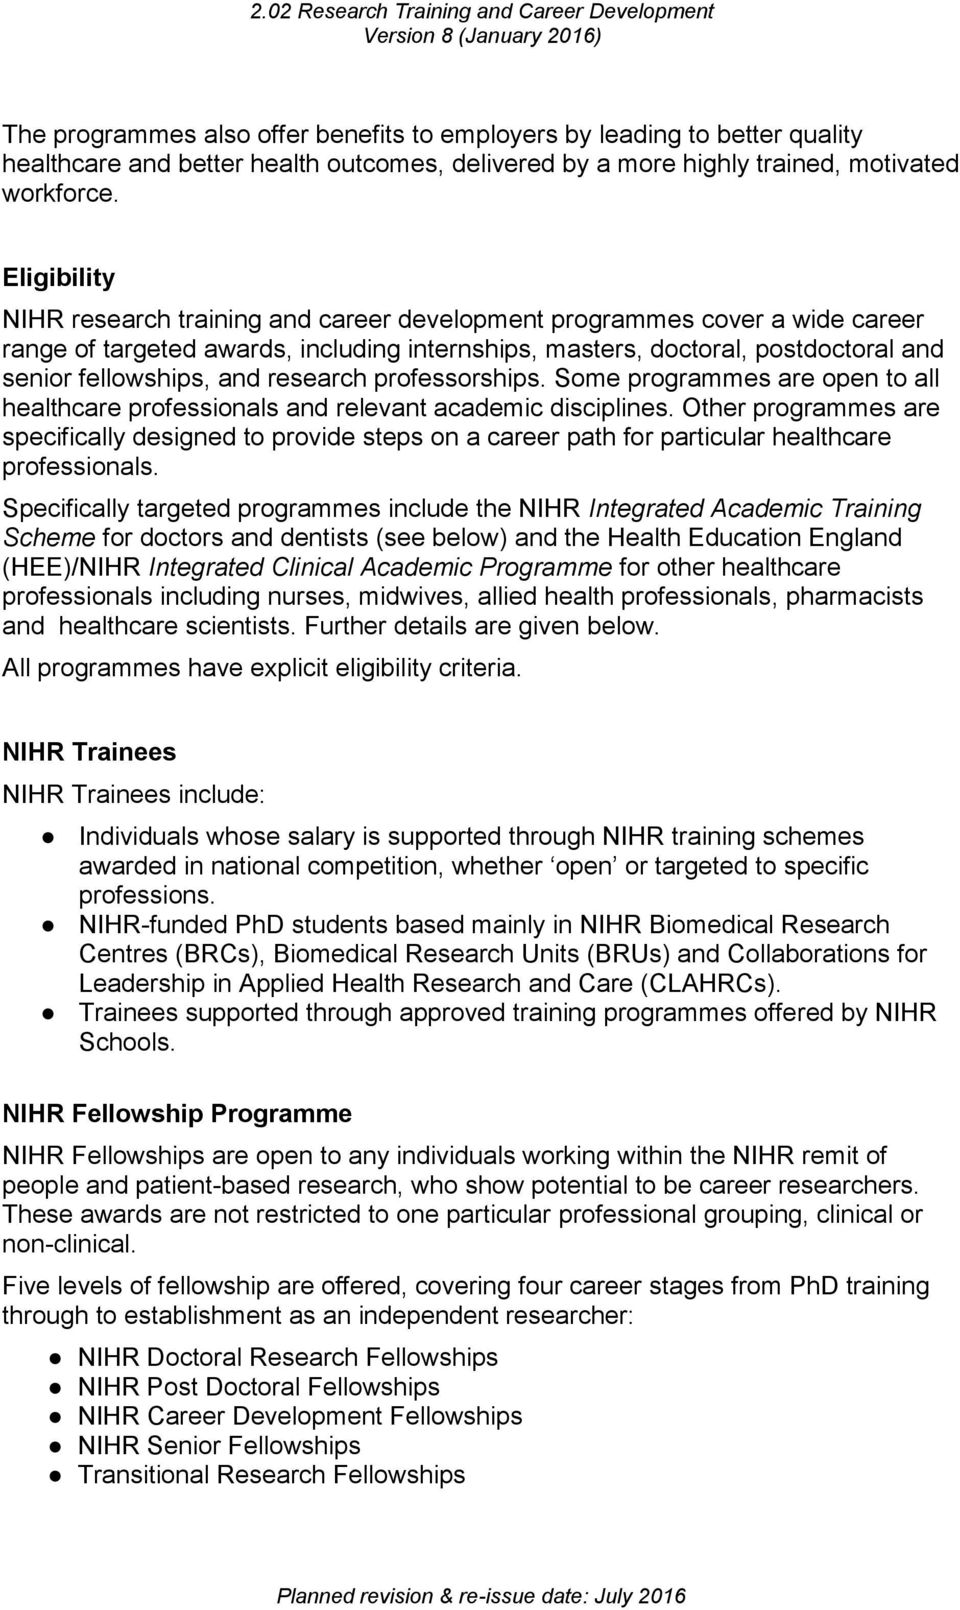 research professorships. Some programmes are open to all healthcare professionals and relevant academic disciplines.